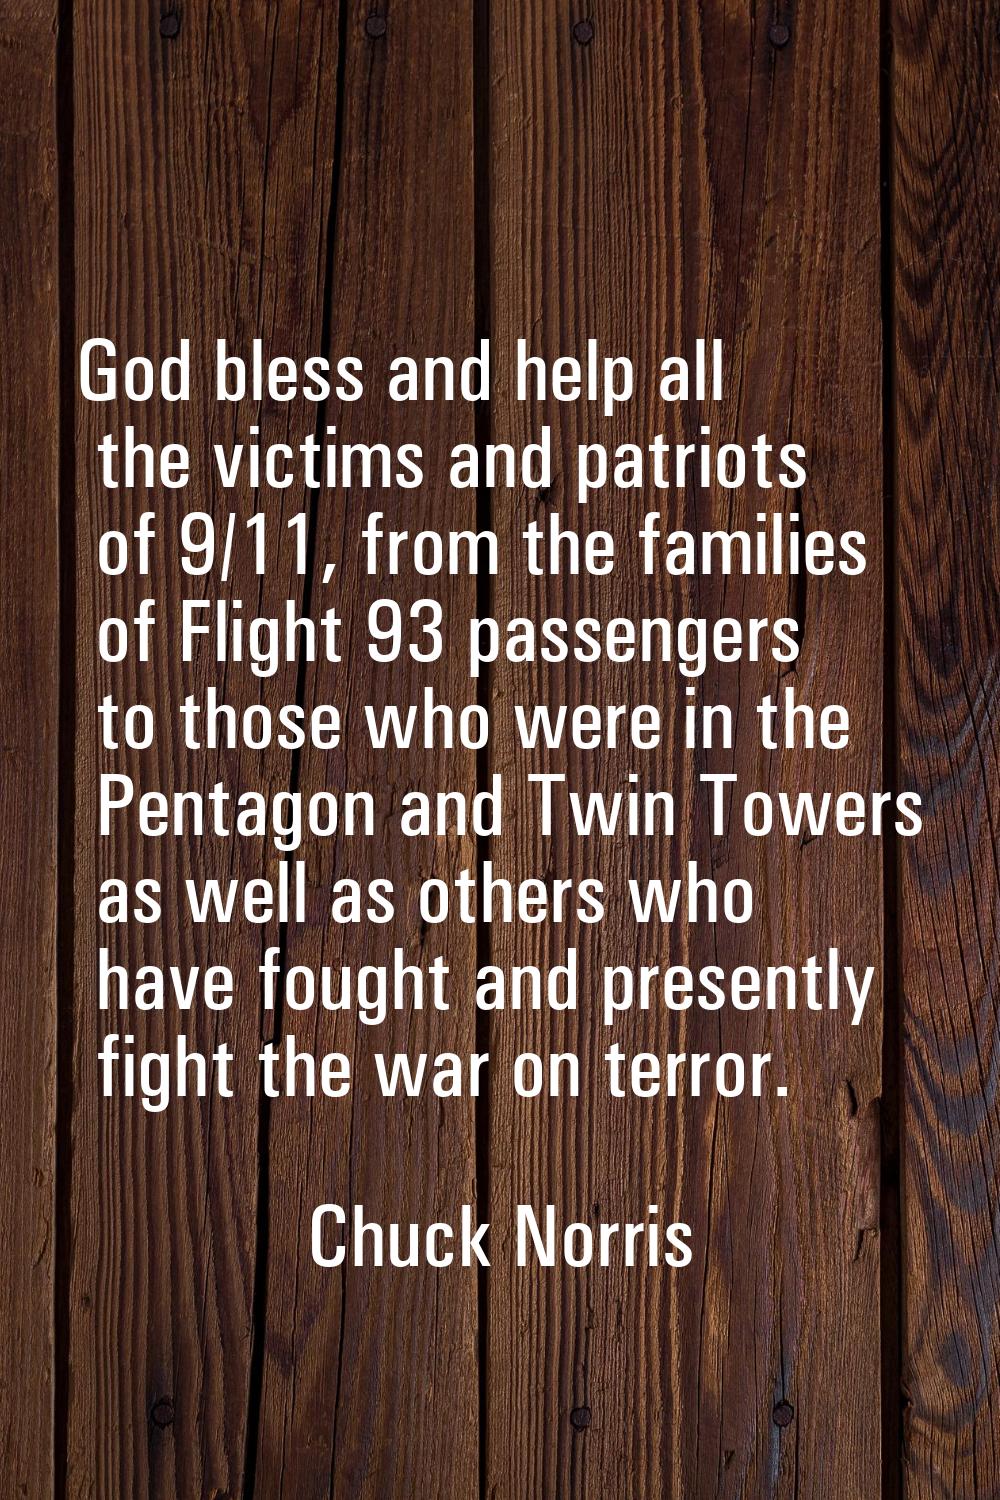 God bless and help all the victims and patriots of 9/11, from the families of Flight 93 passengers 